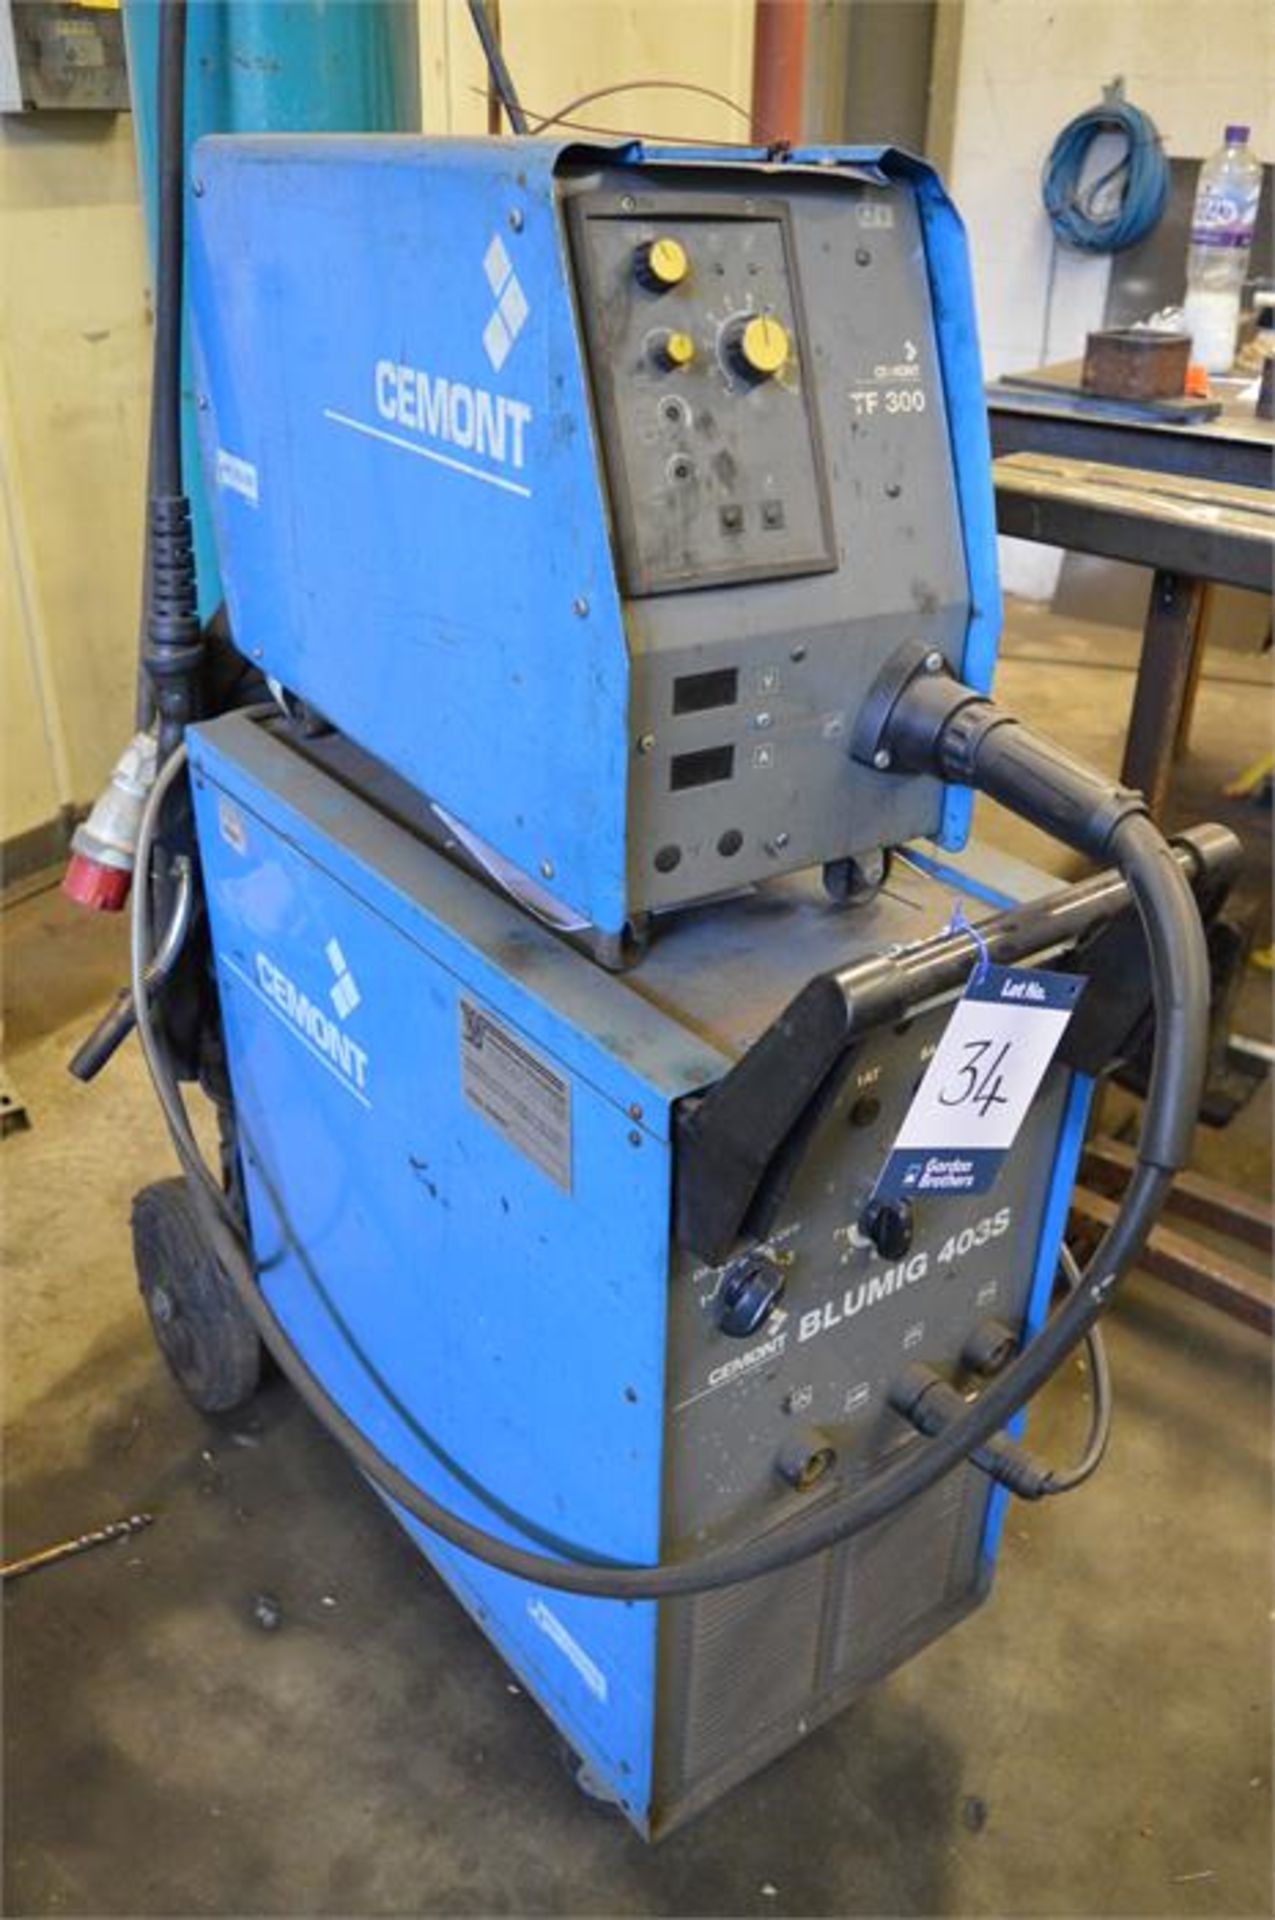 Cemont, Blumig 403S mig welder, Serial No. 4415843 with Cemont, TF300 wire feed unit, 4367902